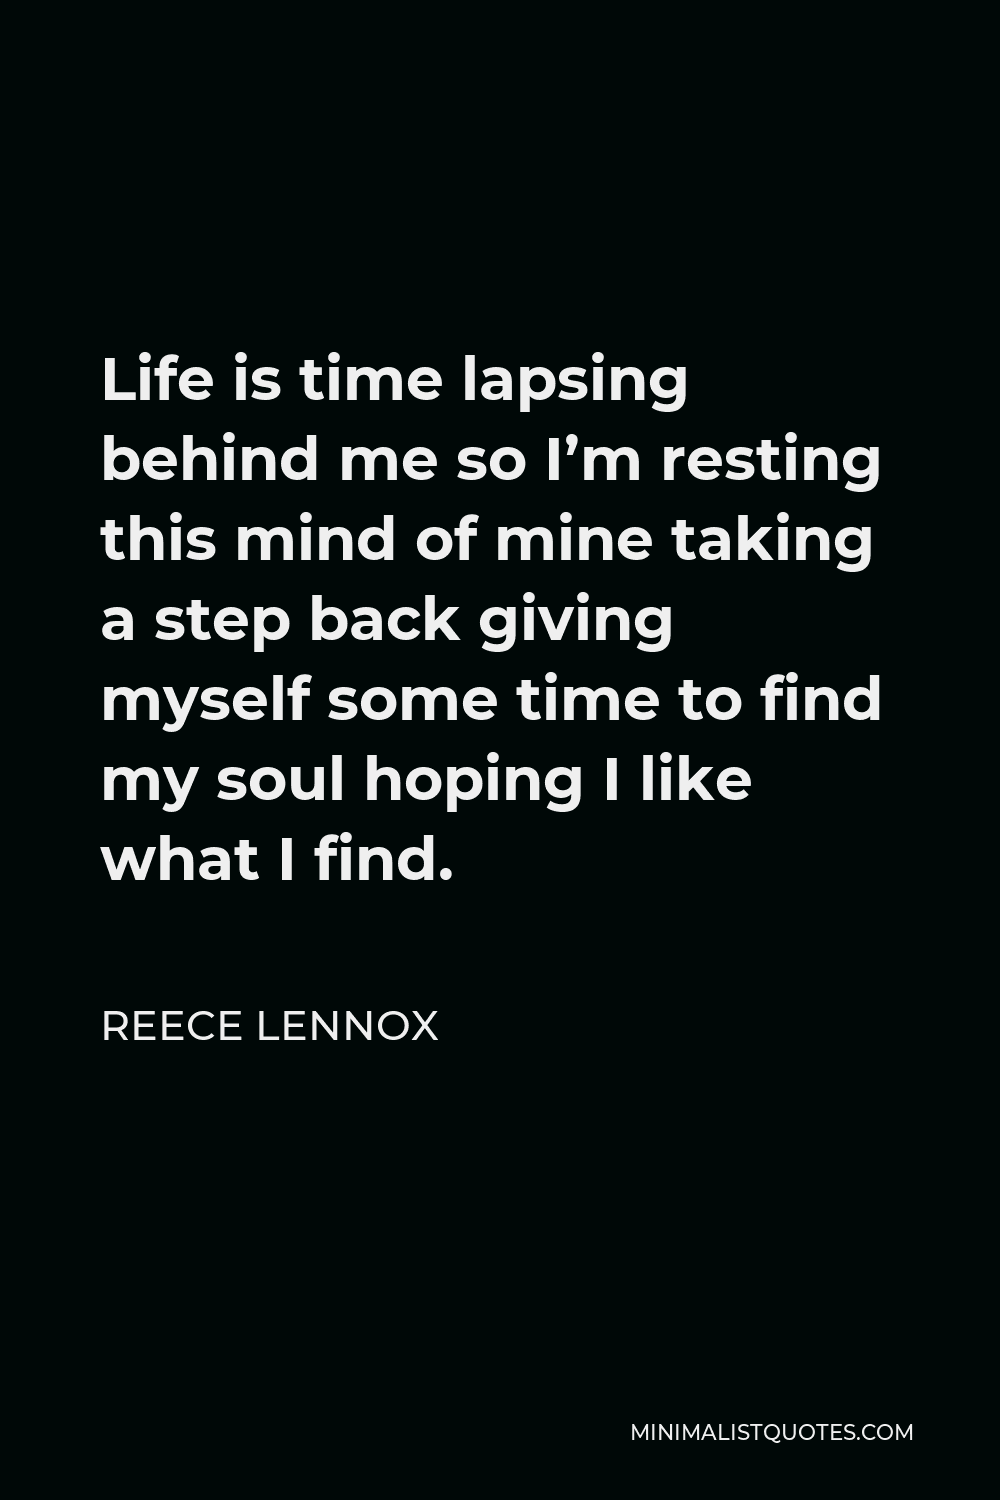 Reece Lennox Quote - Life is time lapsing behind me so I’m resting this mind of mine taking a step back giving myself some time to find my soul hoping I like what I find.